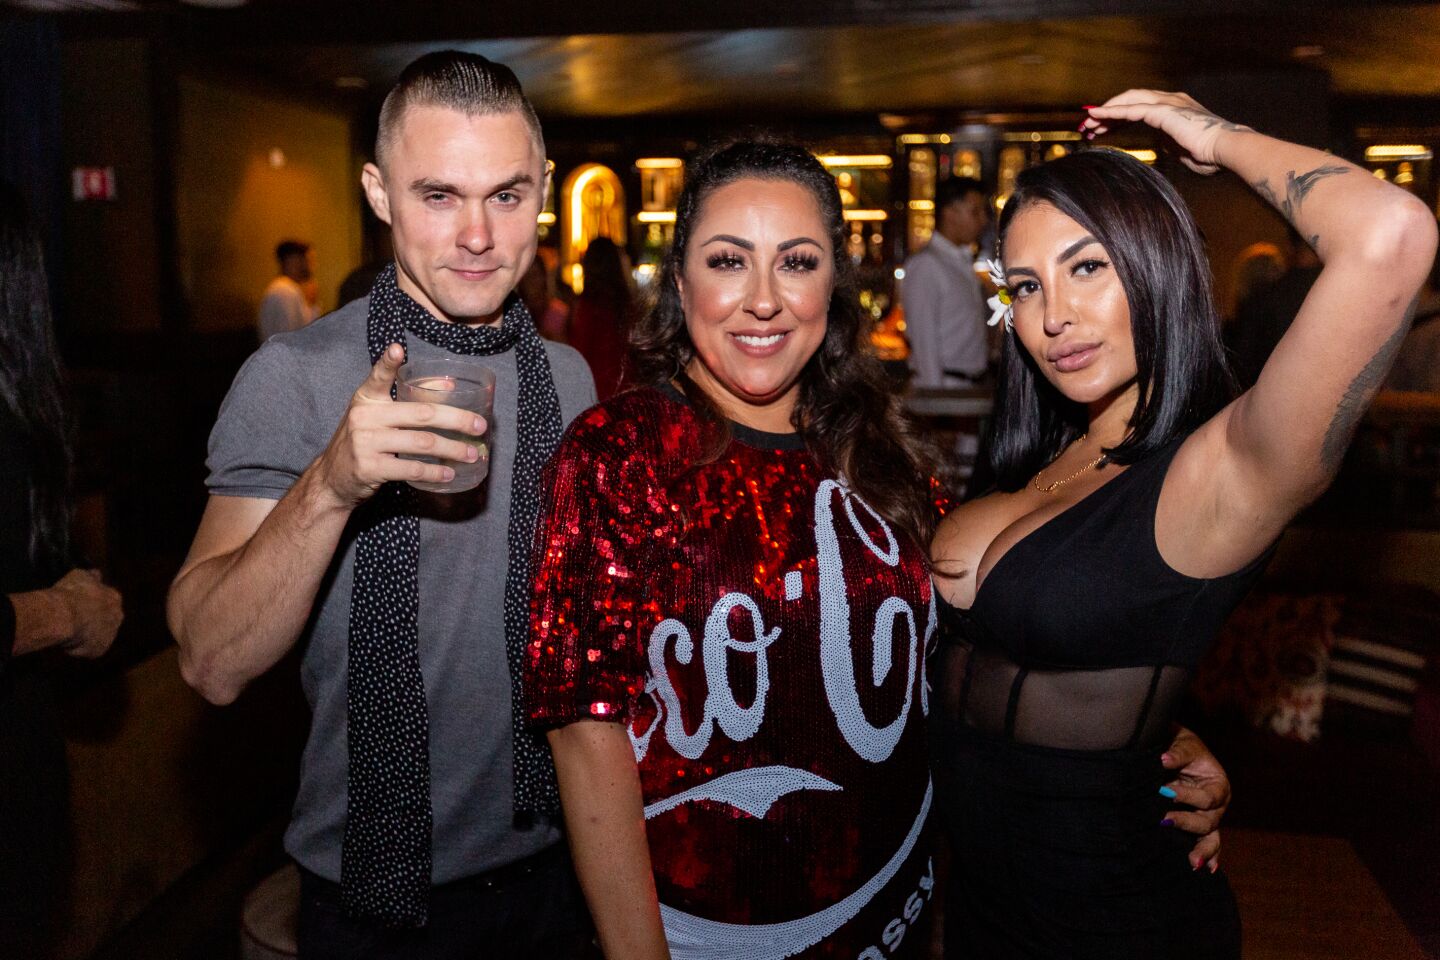 Your new favorite day of the week? Iconic Thursdays at Oxford Social Club. Photos from Oct. 3, 2019.